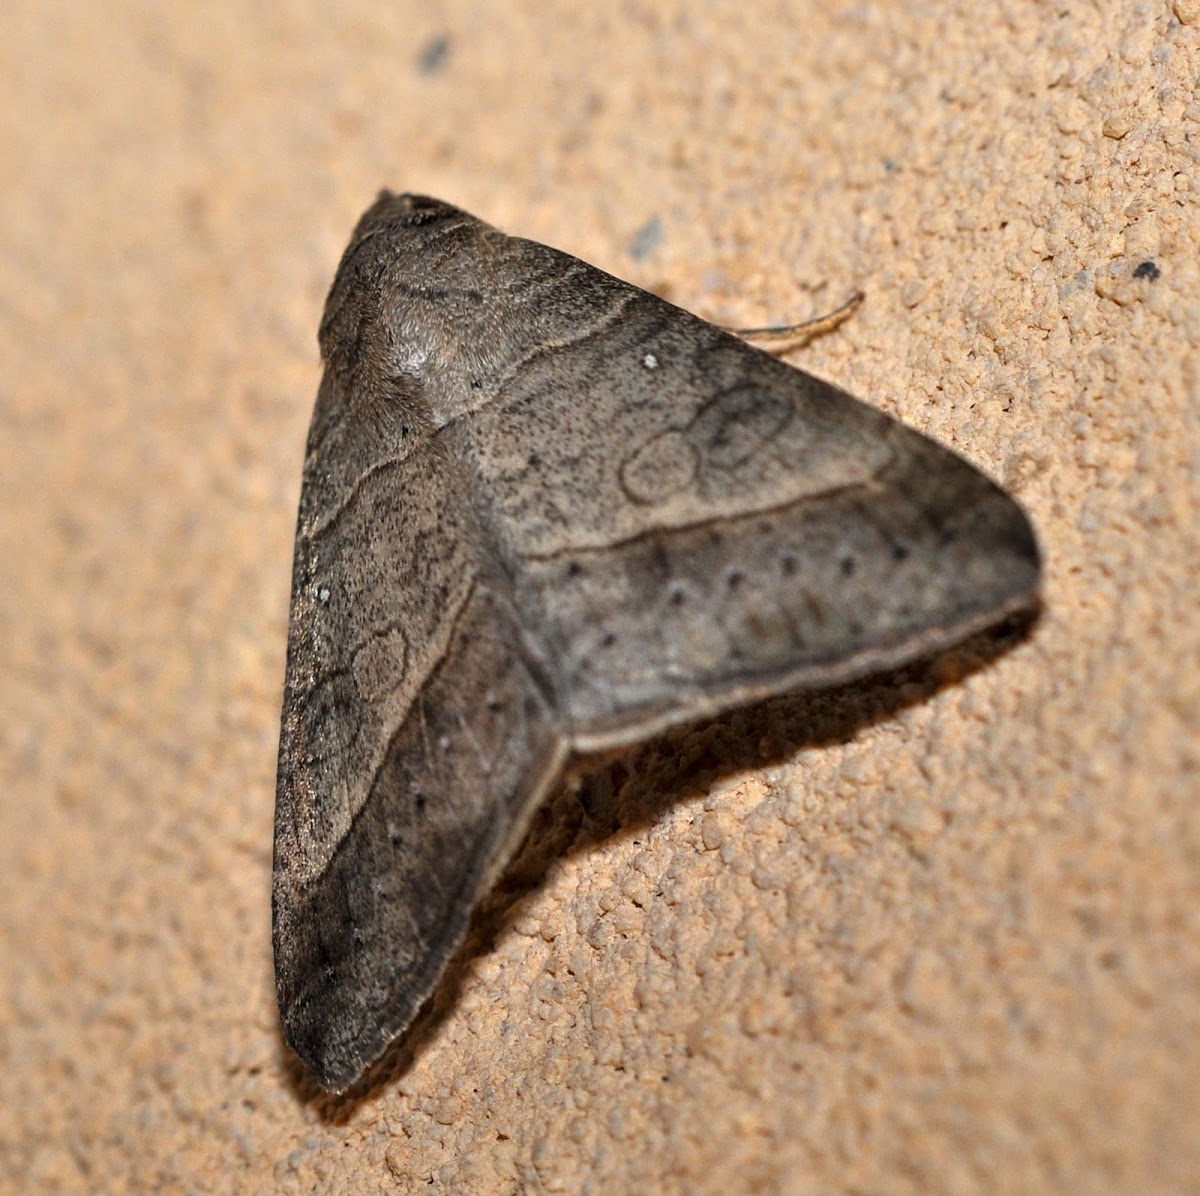 Small Mocis Moth or Striped Grass Looper